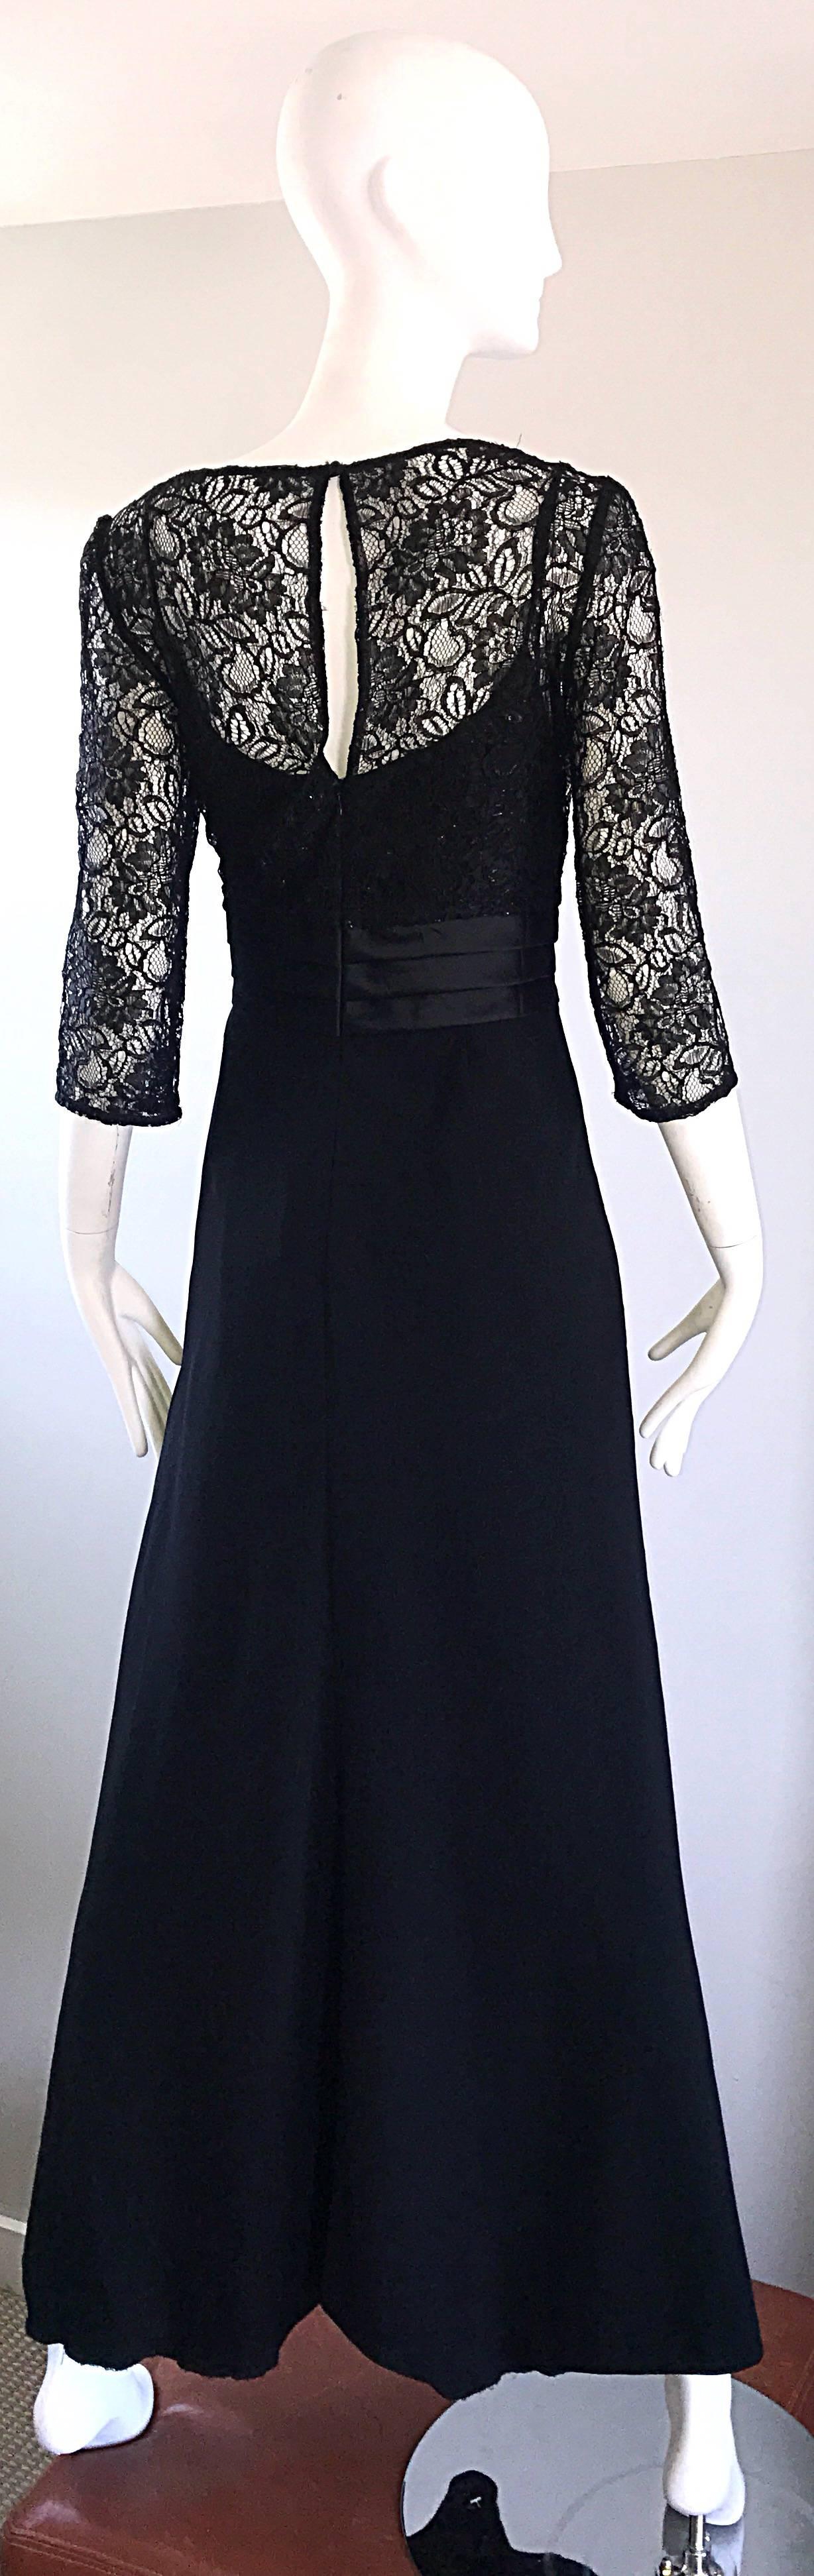 Badgley Mischka Beautiful Black Lace 3/4 Sleeves Size 8 Vintage Gown, 1990s   For Sale 1